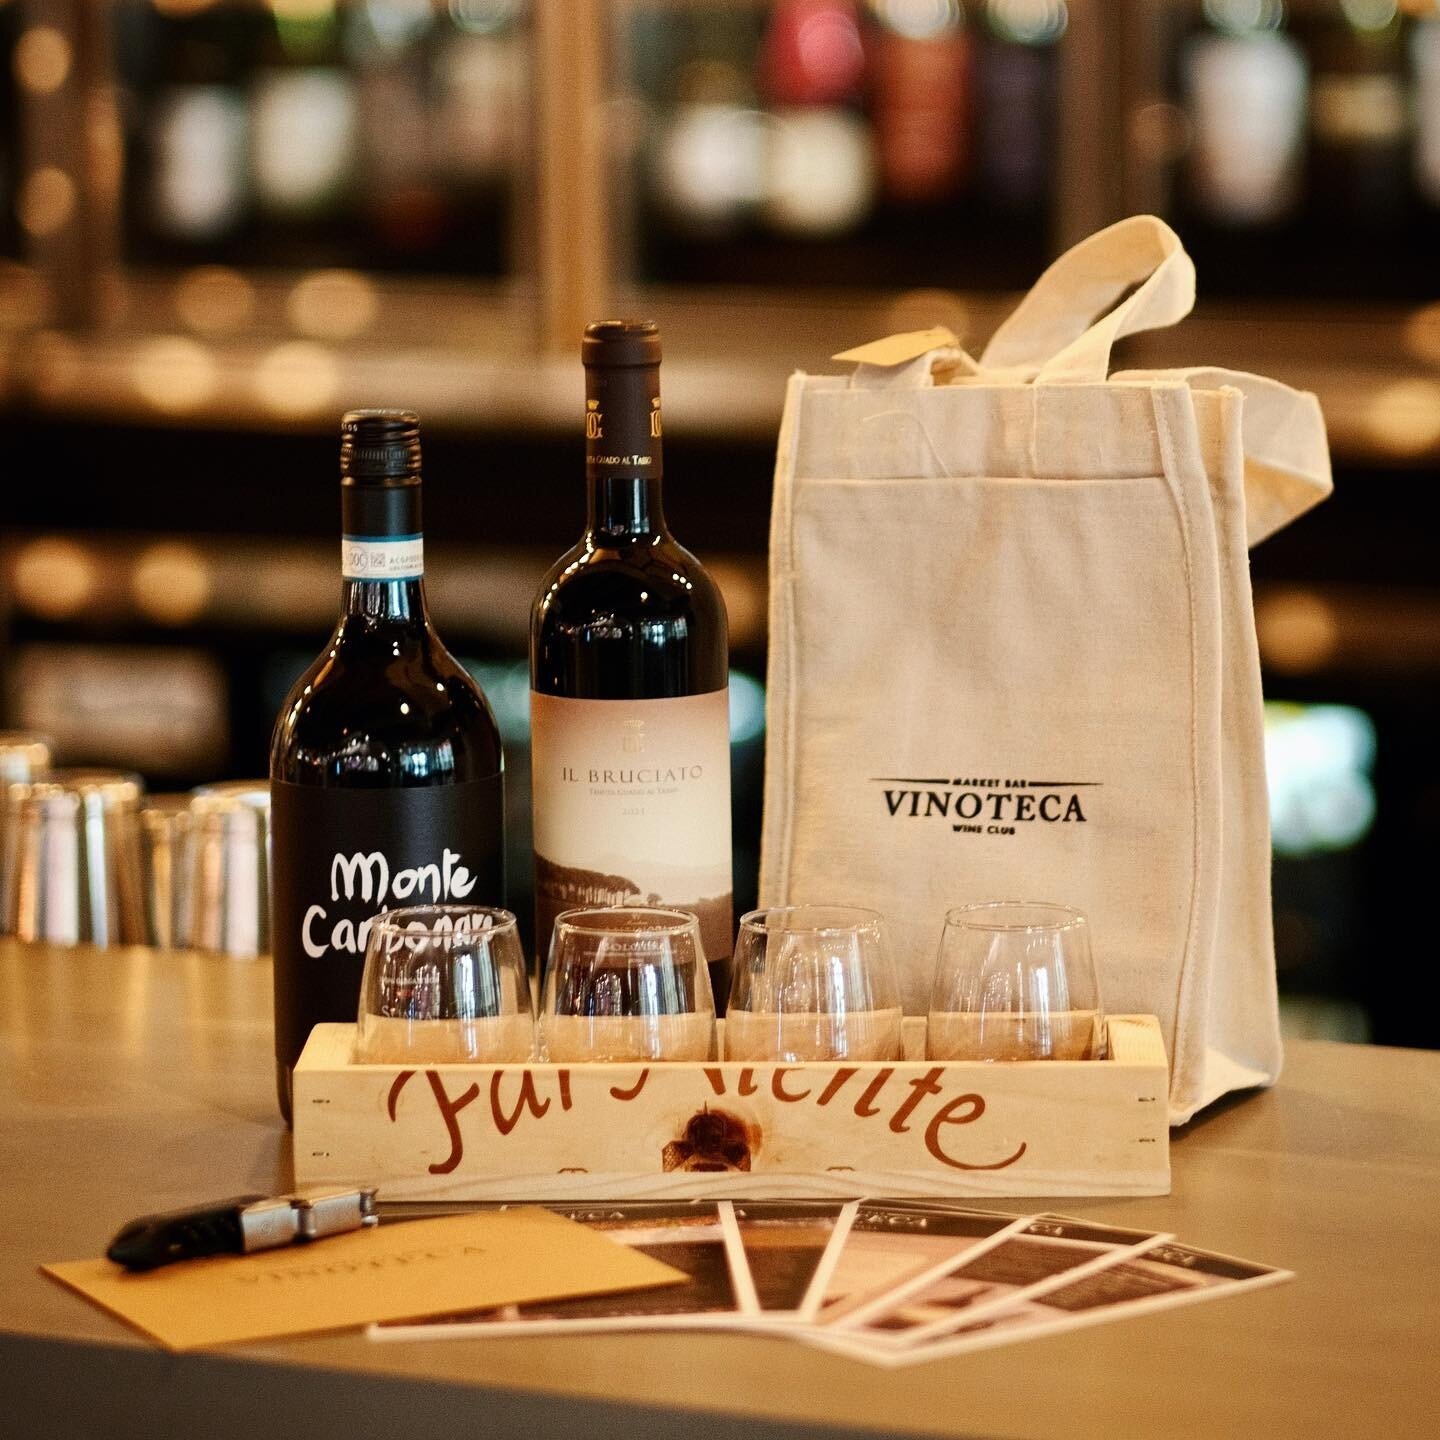 Have you heard about the @mbvinoteca Wine Club? Sip, sip, sign us up! 🍇

As a member, you receive:
🍷 Two hand-selected wines each month 
🥂 Members-only quarterly wine socials at Bridge Park
✨ A Vinoteca wine tote
🎟️ Discounts on ticketed monthly 